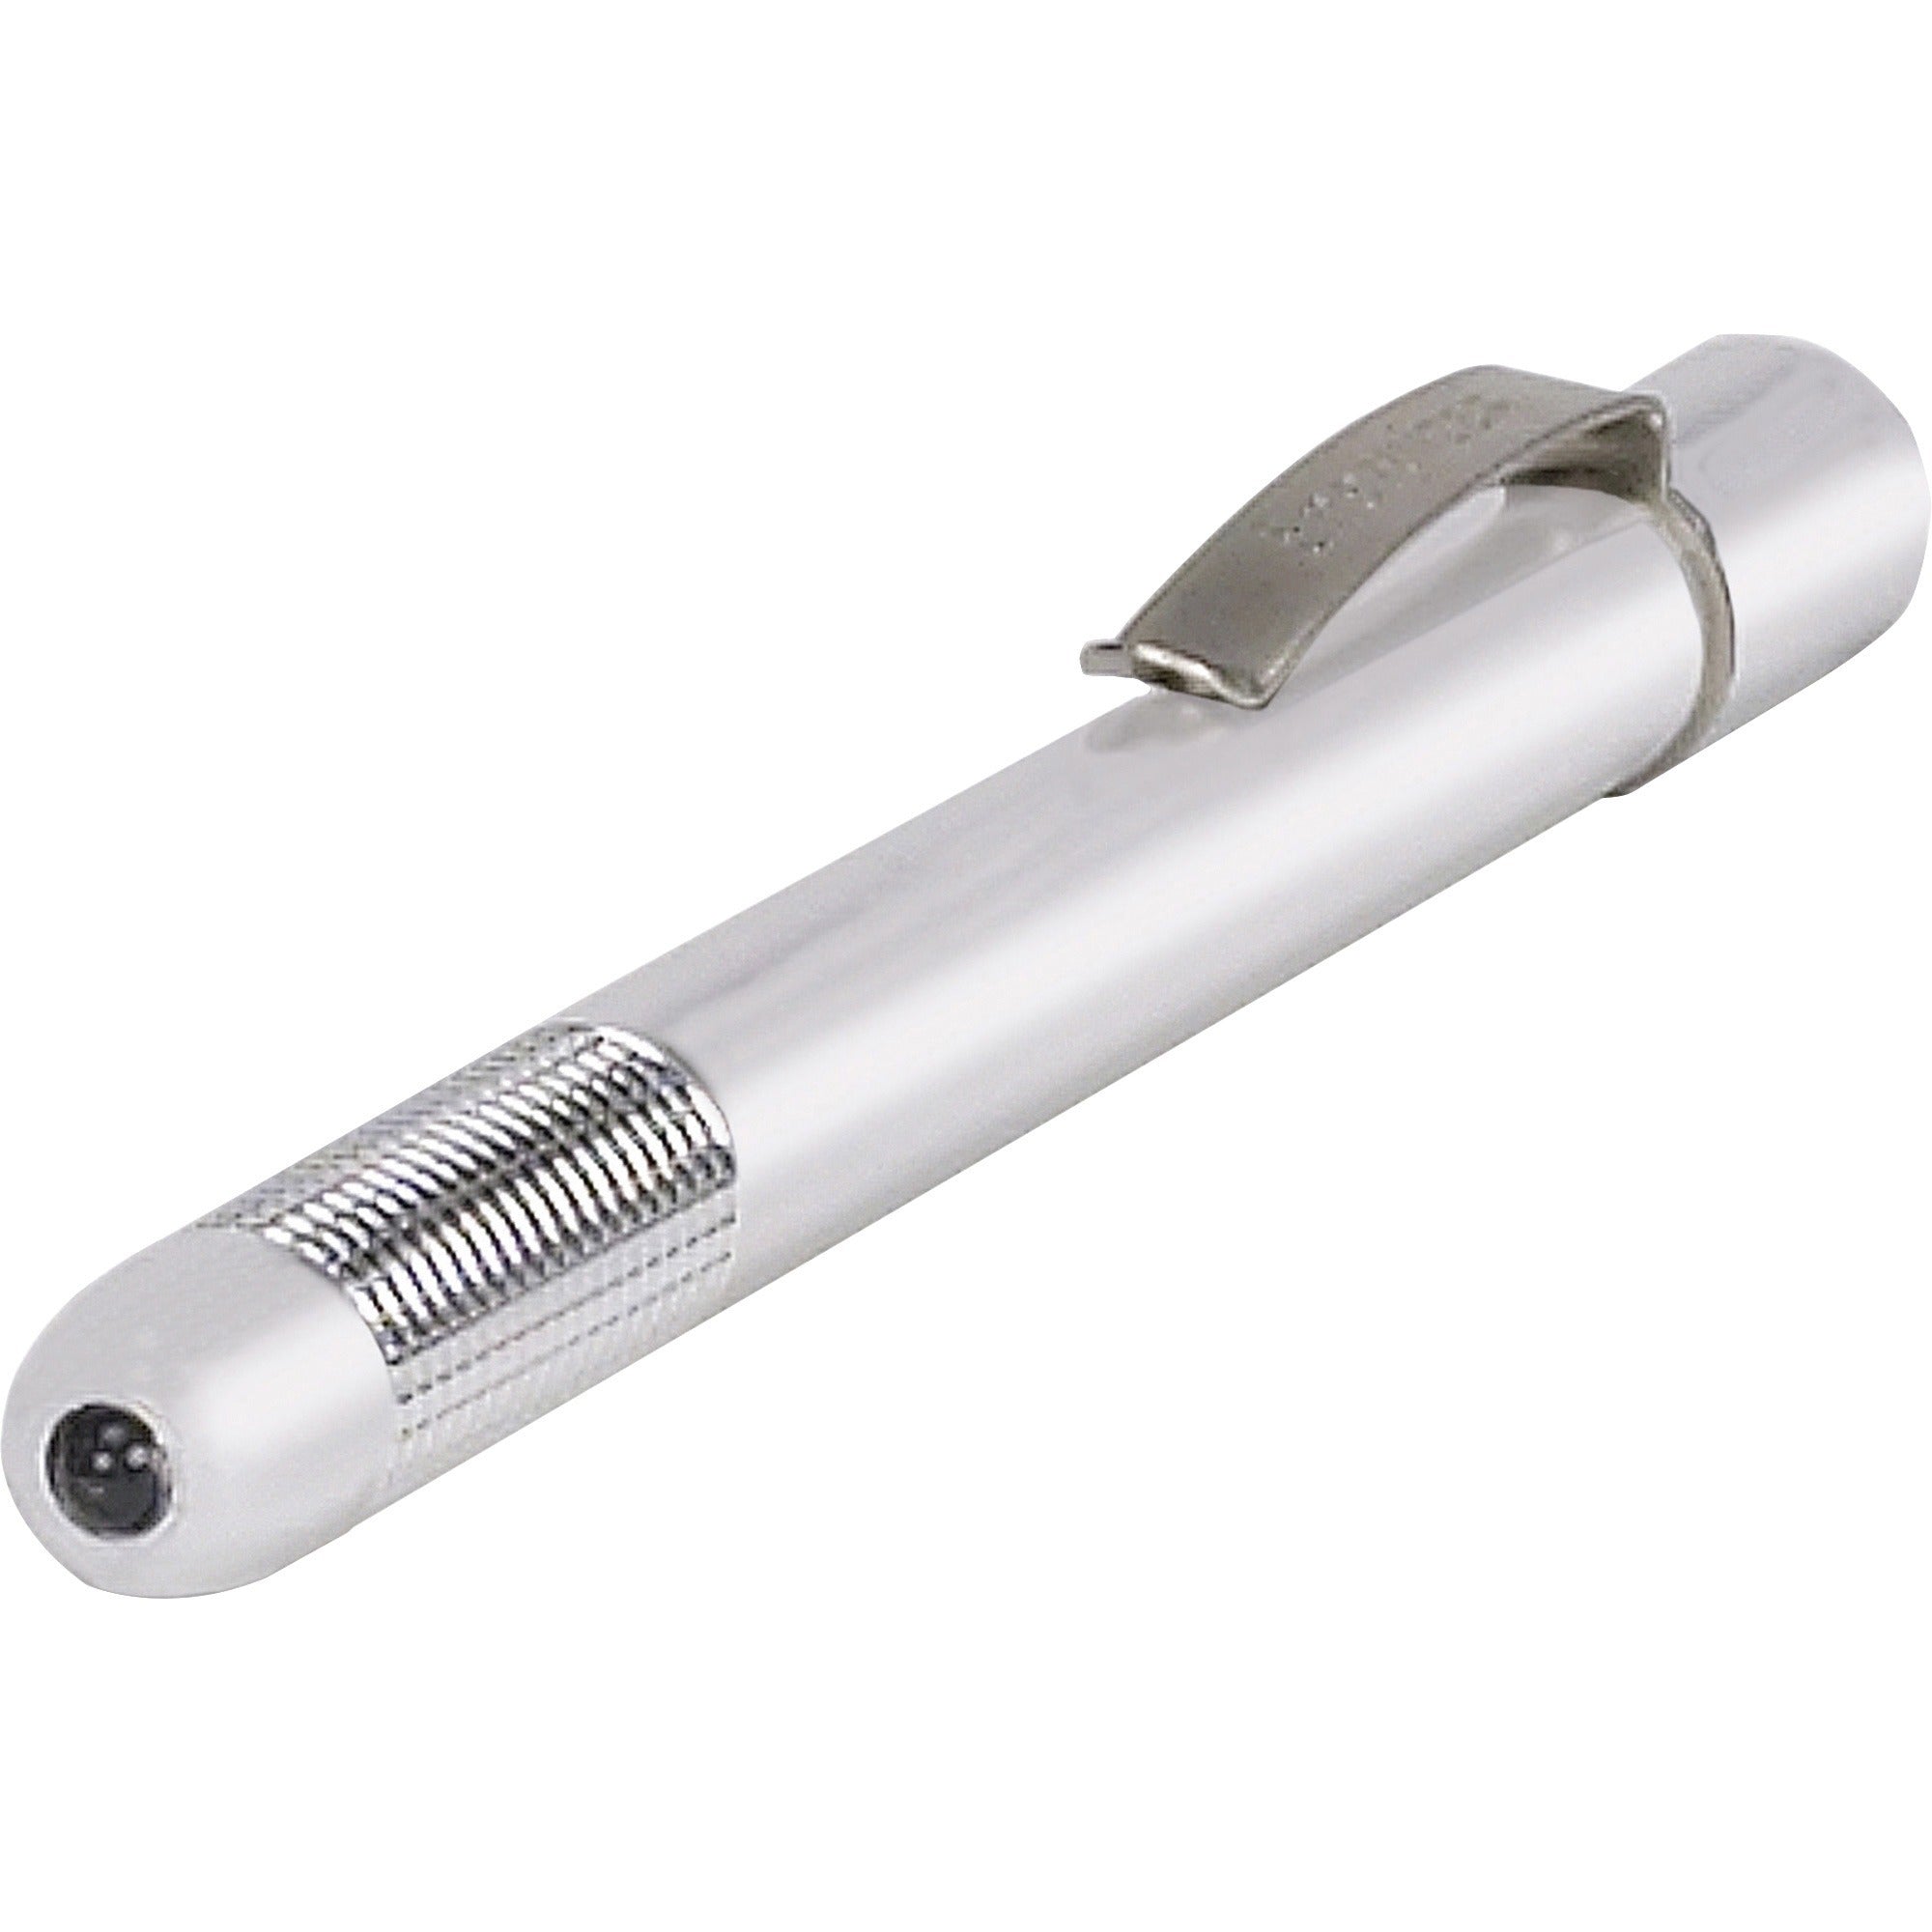 energizer-led-pen-light-led-bulb-1-w-6-lm-lumen-2-x-aaa-battery-stainless-steel-drop-resistant-silver_evepled23aehct - 2